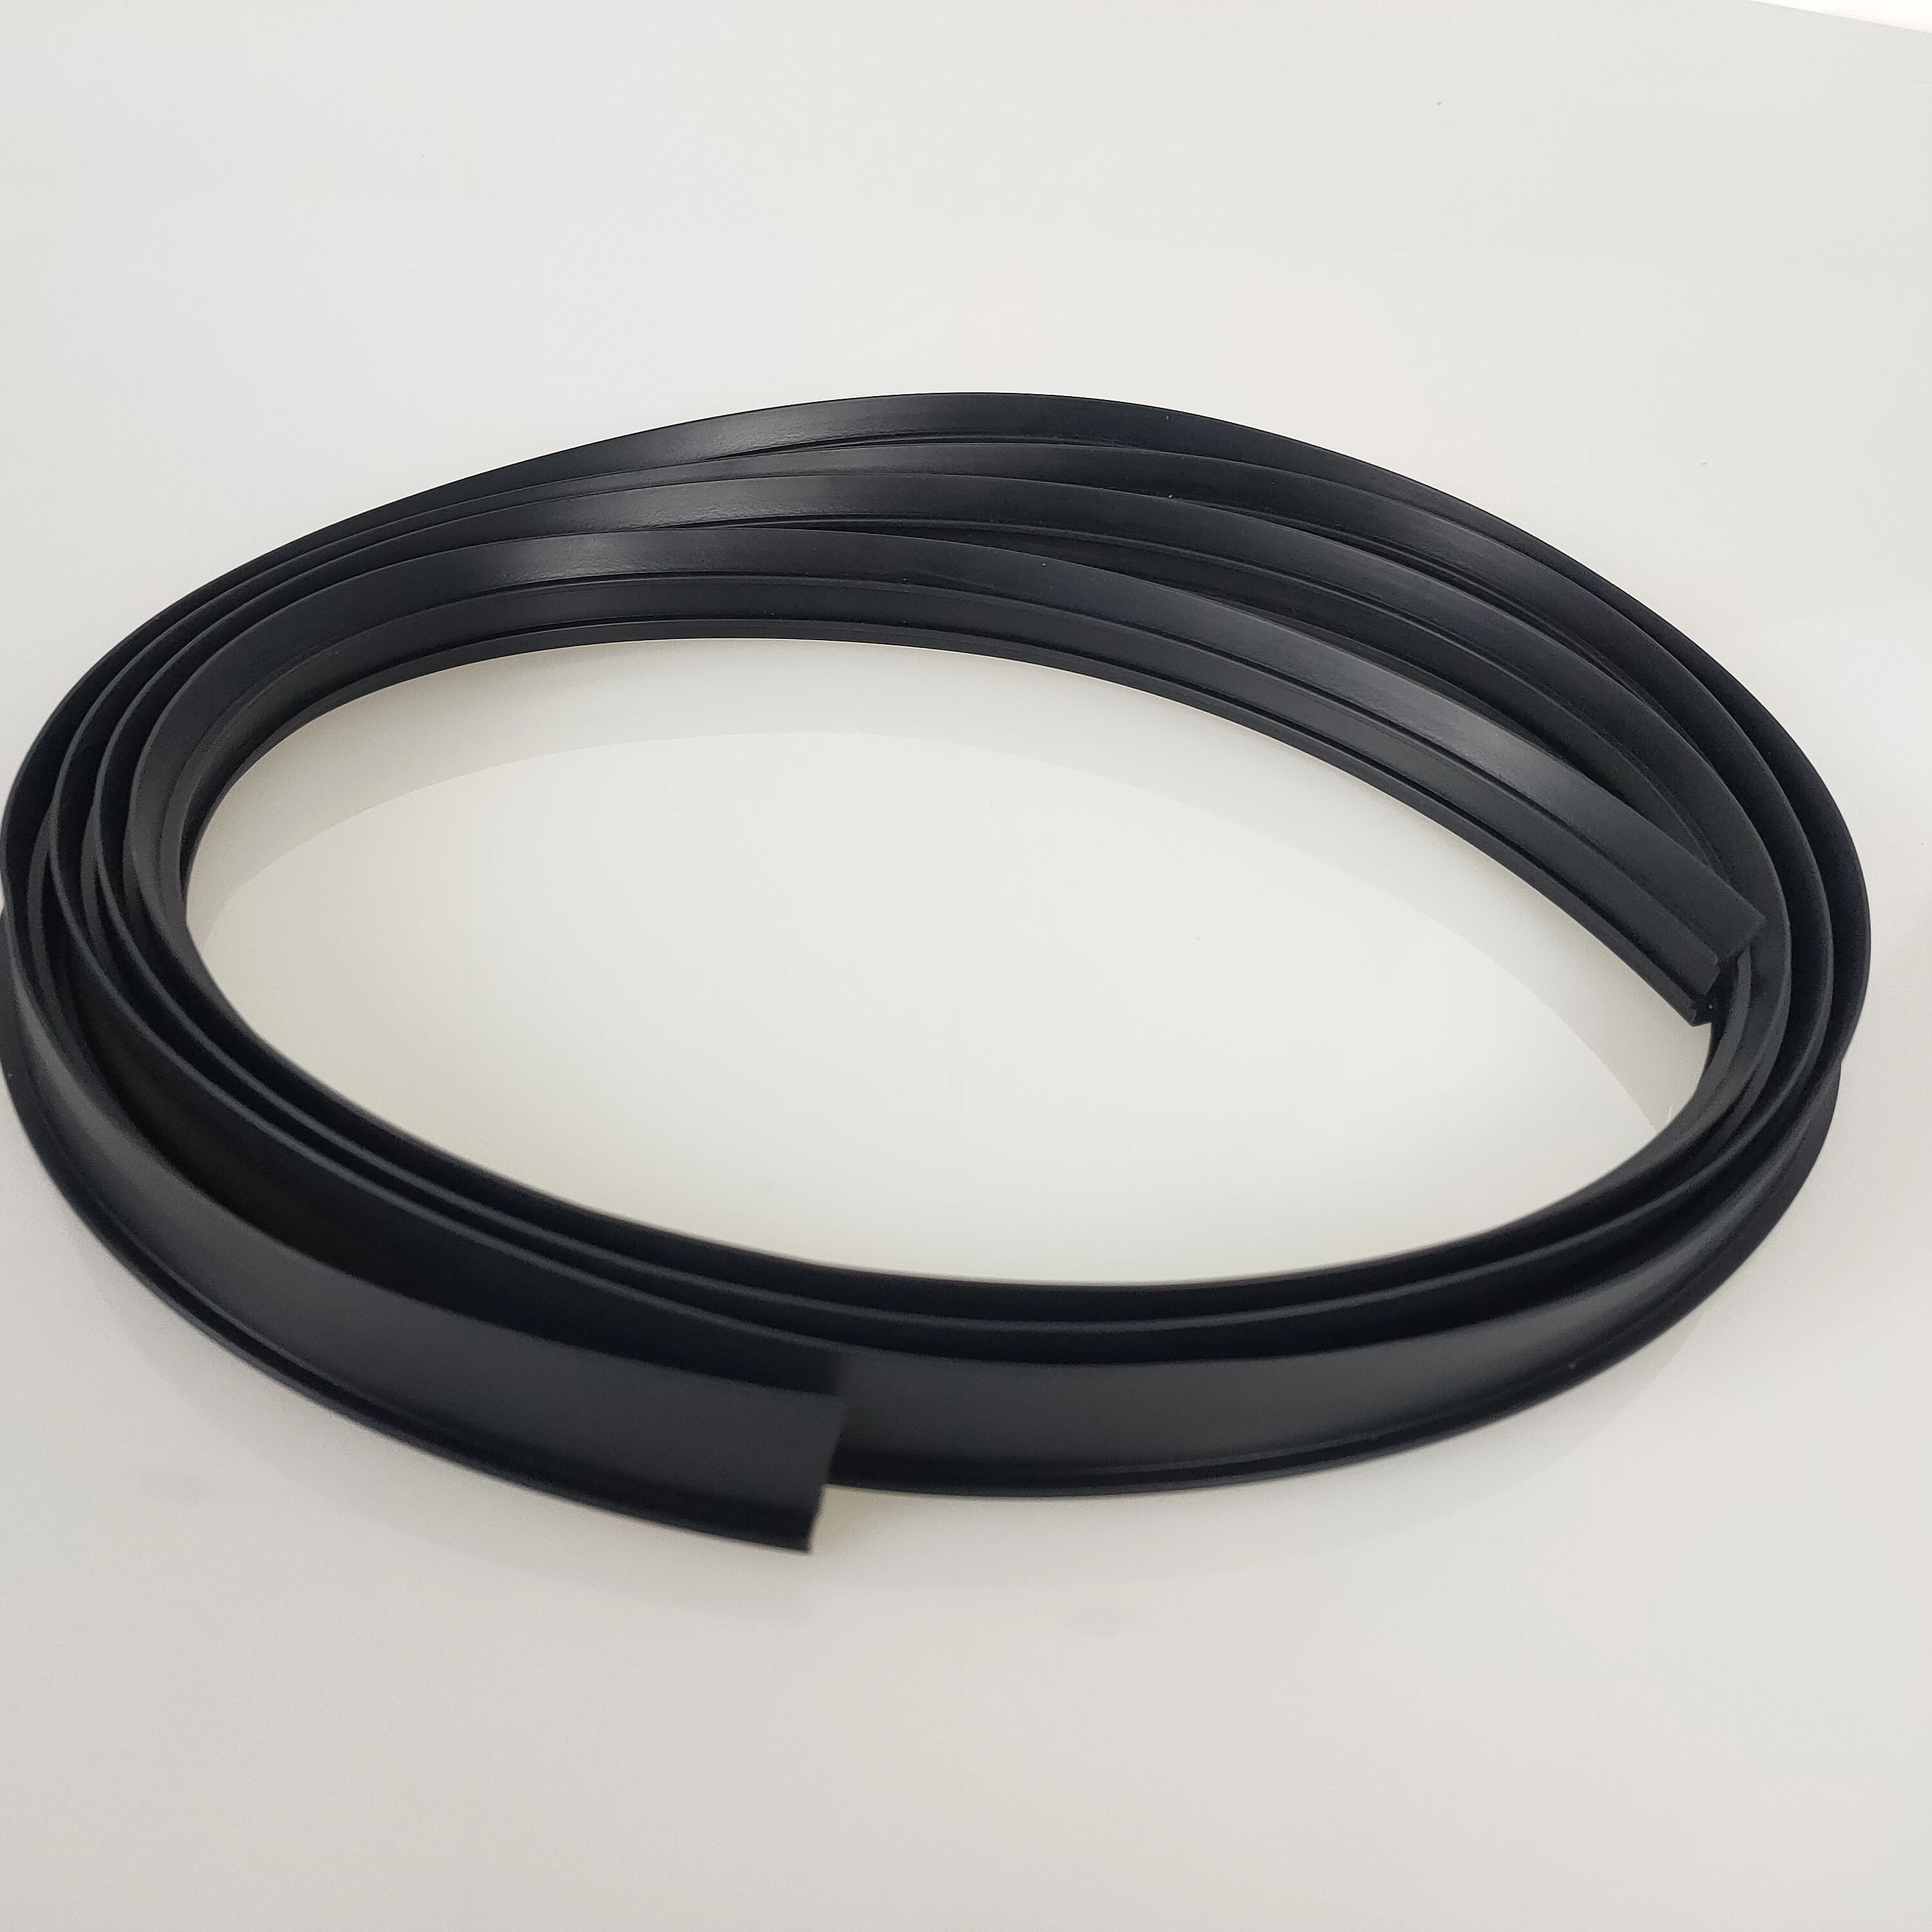 EPDM rubber seal reefer container door rubber gasket seals refrigerator use